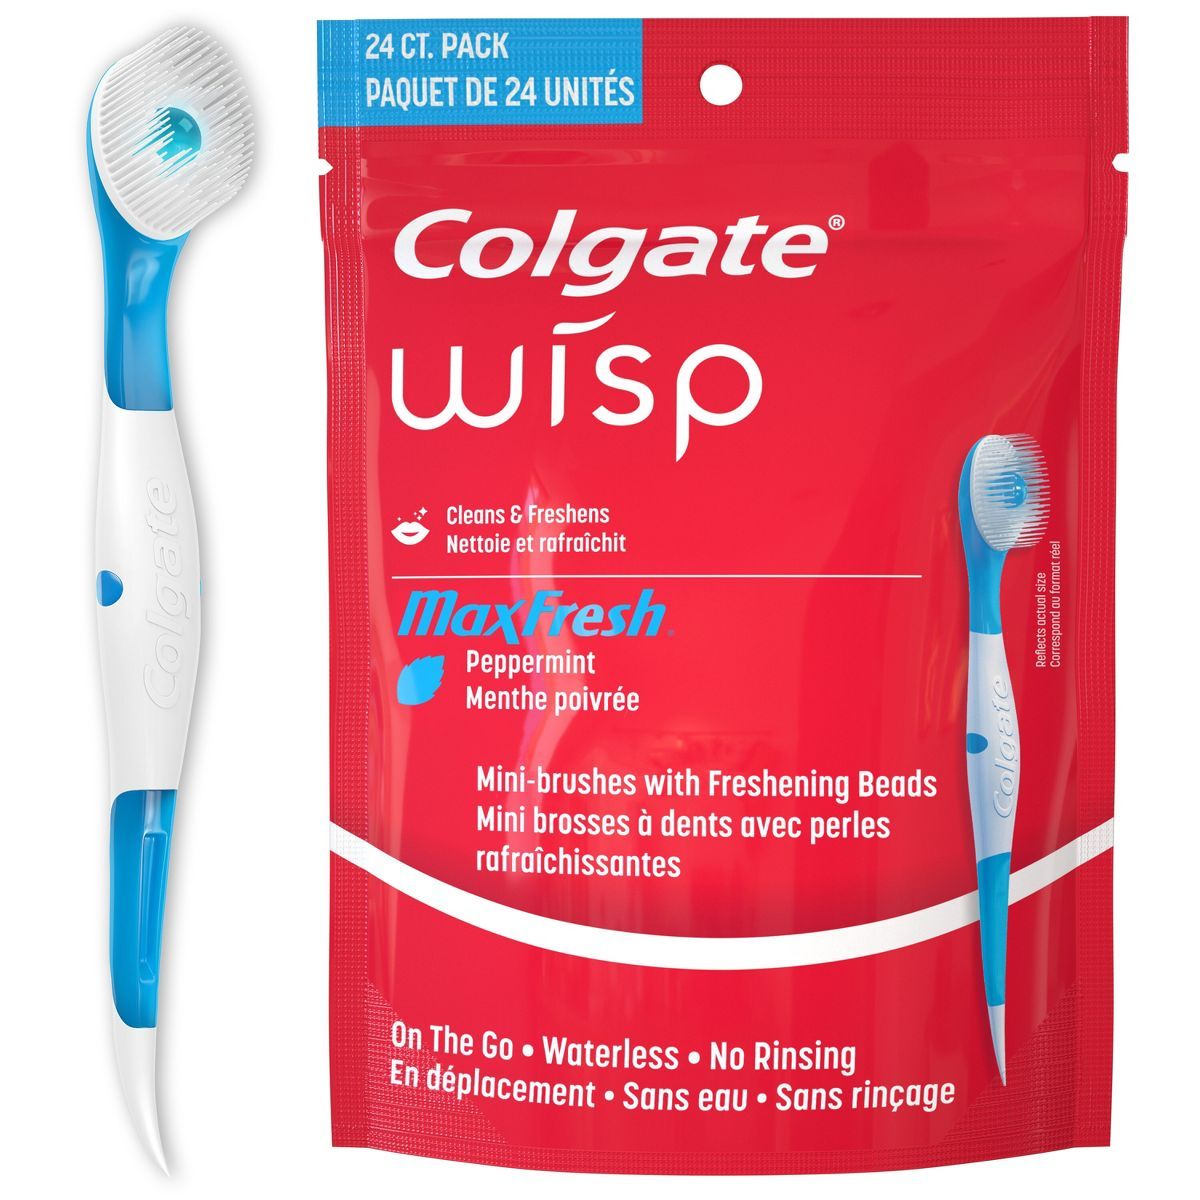 Colgate Optic White Wisp Disposable Mini Toothbrush, Peppermint - Trial Size - 24ct | Target